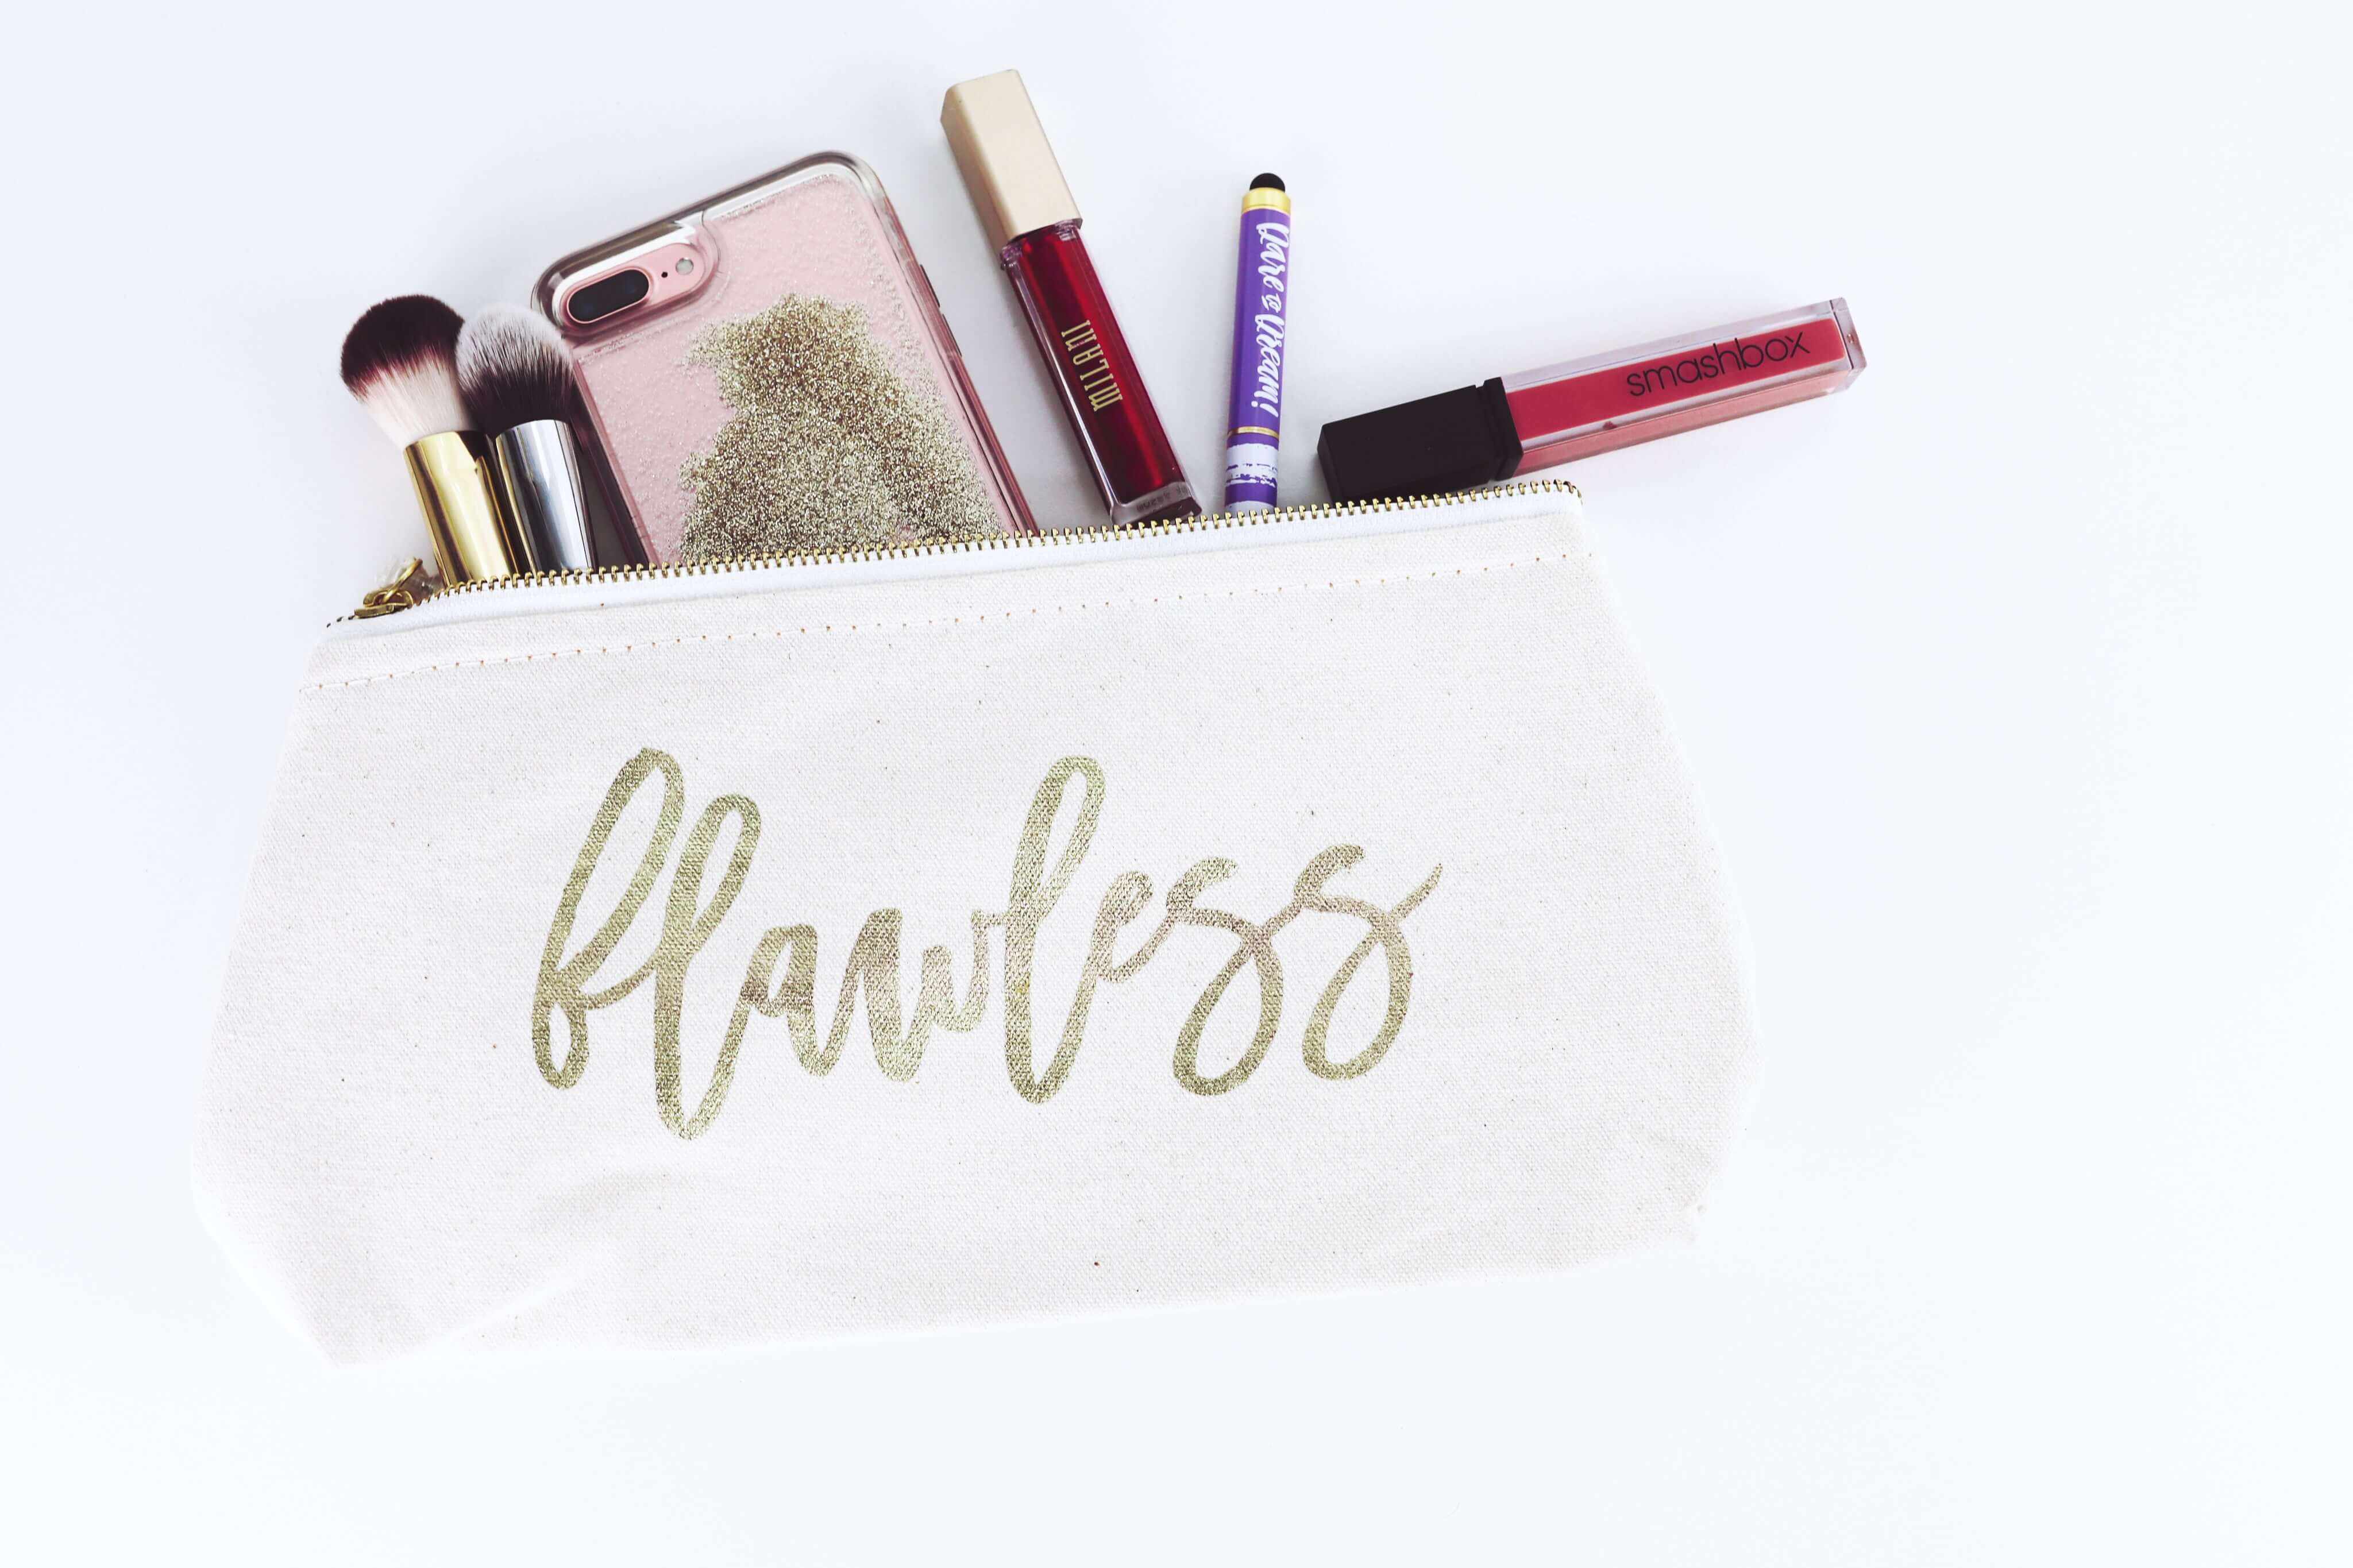 A makeup bag with the word "flawless" in gold cursive letteringprinted on it